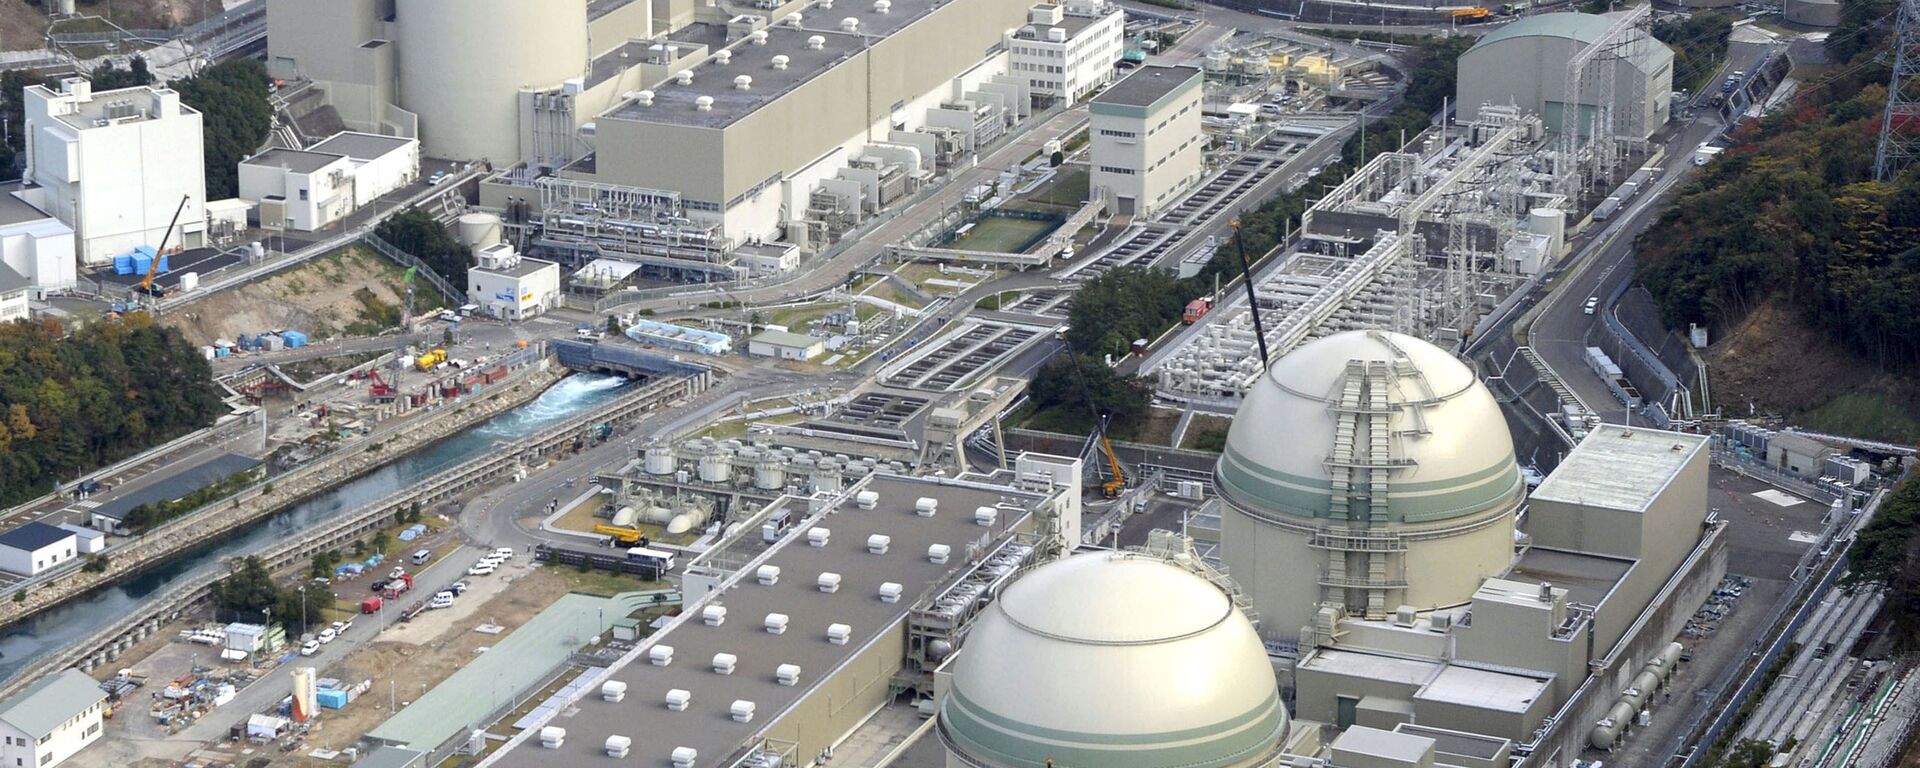 An aerial view shows No. 4 (front L), No. 3 (front R), No. 2 (rear L) and No. 1 reactor buildings at Kansai Electric Power Co.'s Takahama nuclear power plant in Takahama town, Fukui prefecture, in this photo taken by Kyodo November 27, 2014. - Sputnik Mundo, 1920, 11.03.2021